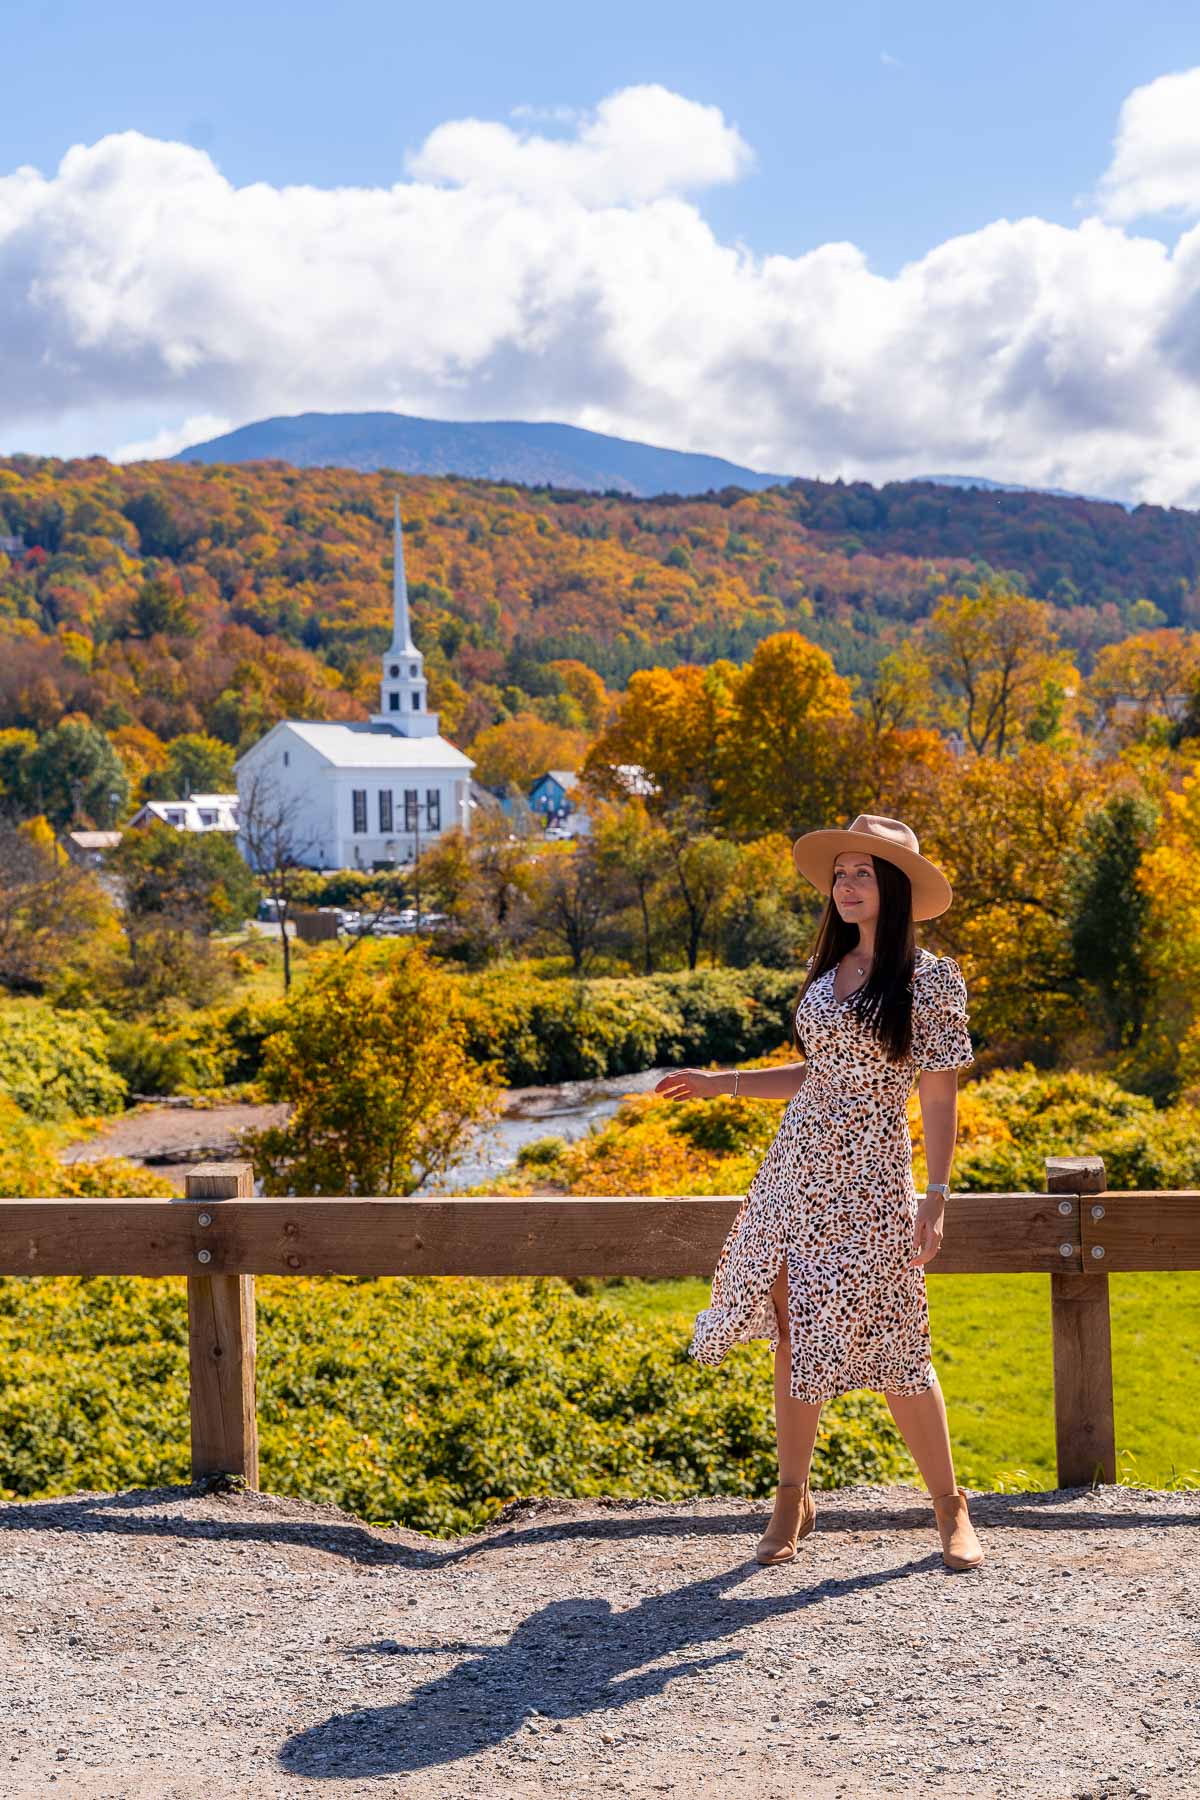 Girl at a viewpoint in Stowe Vermont in the fall